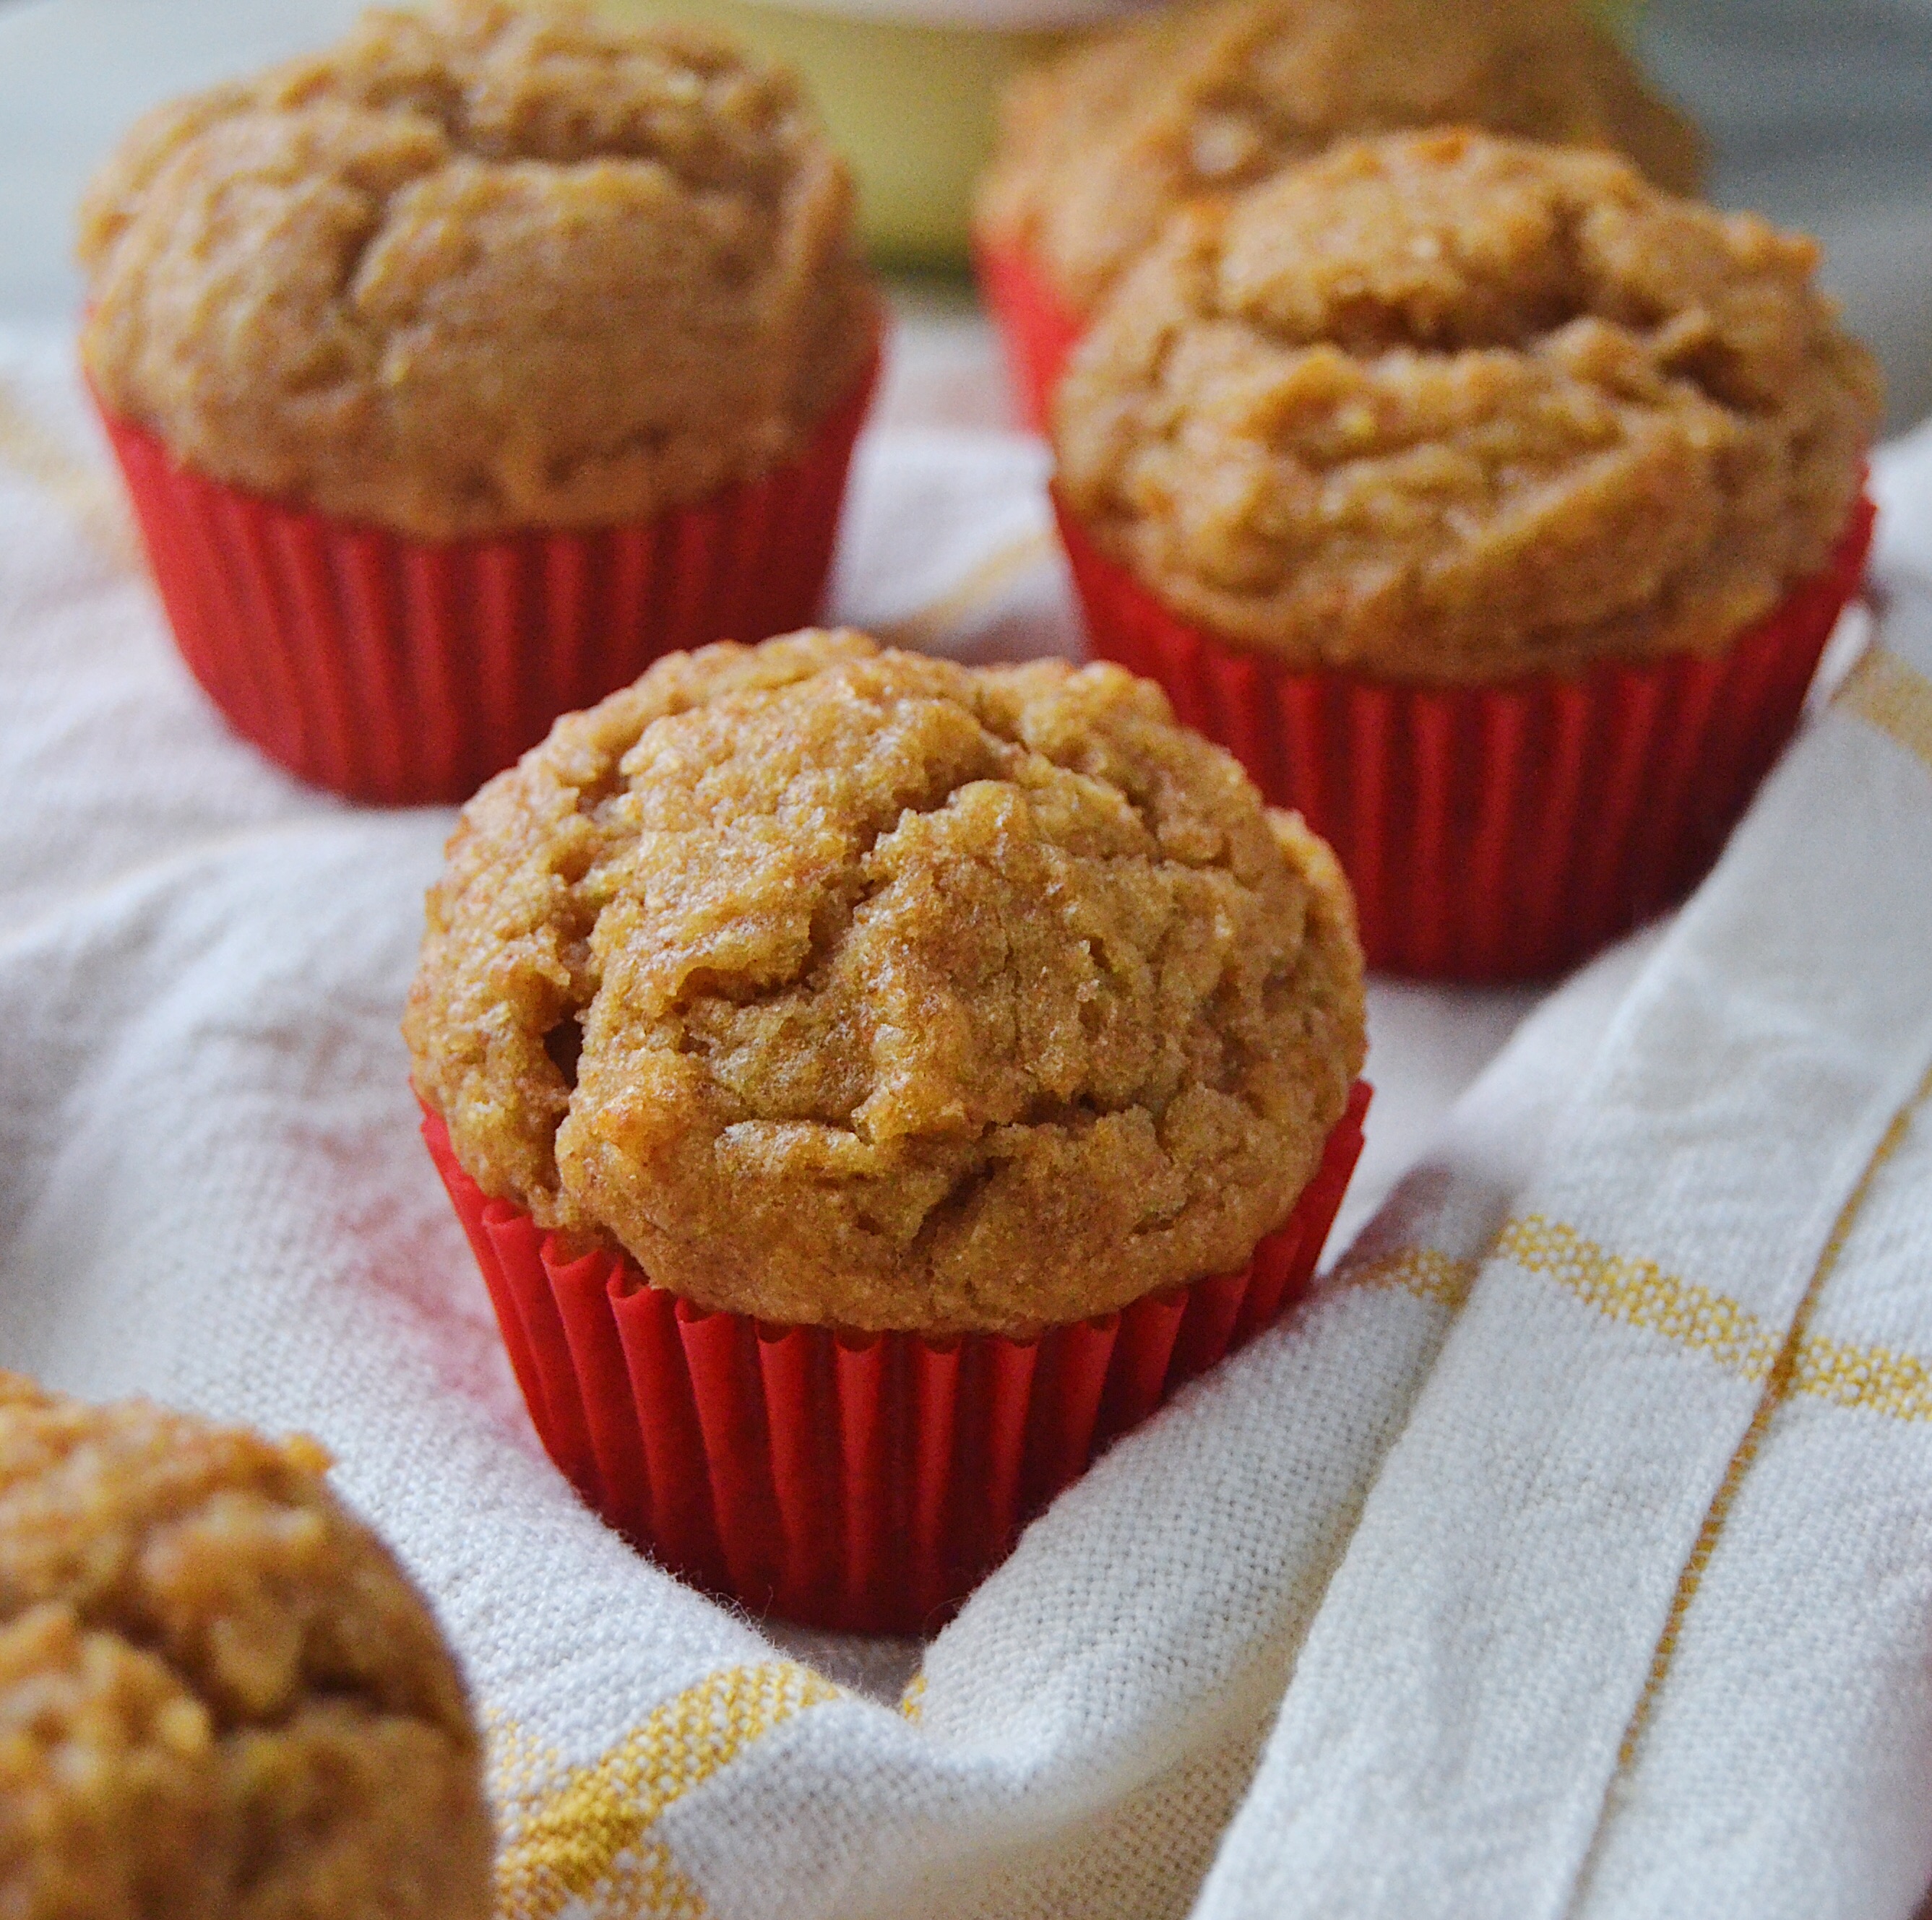 Apple Peanut Butter Pupcakes for the dog you love to spoil